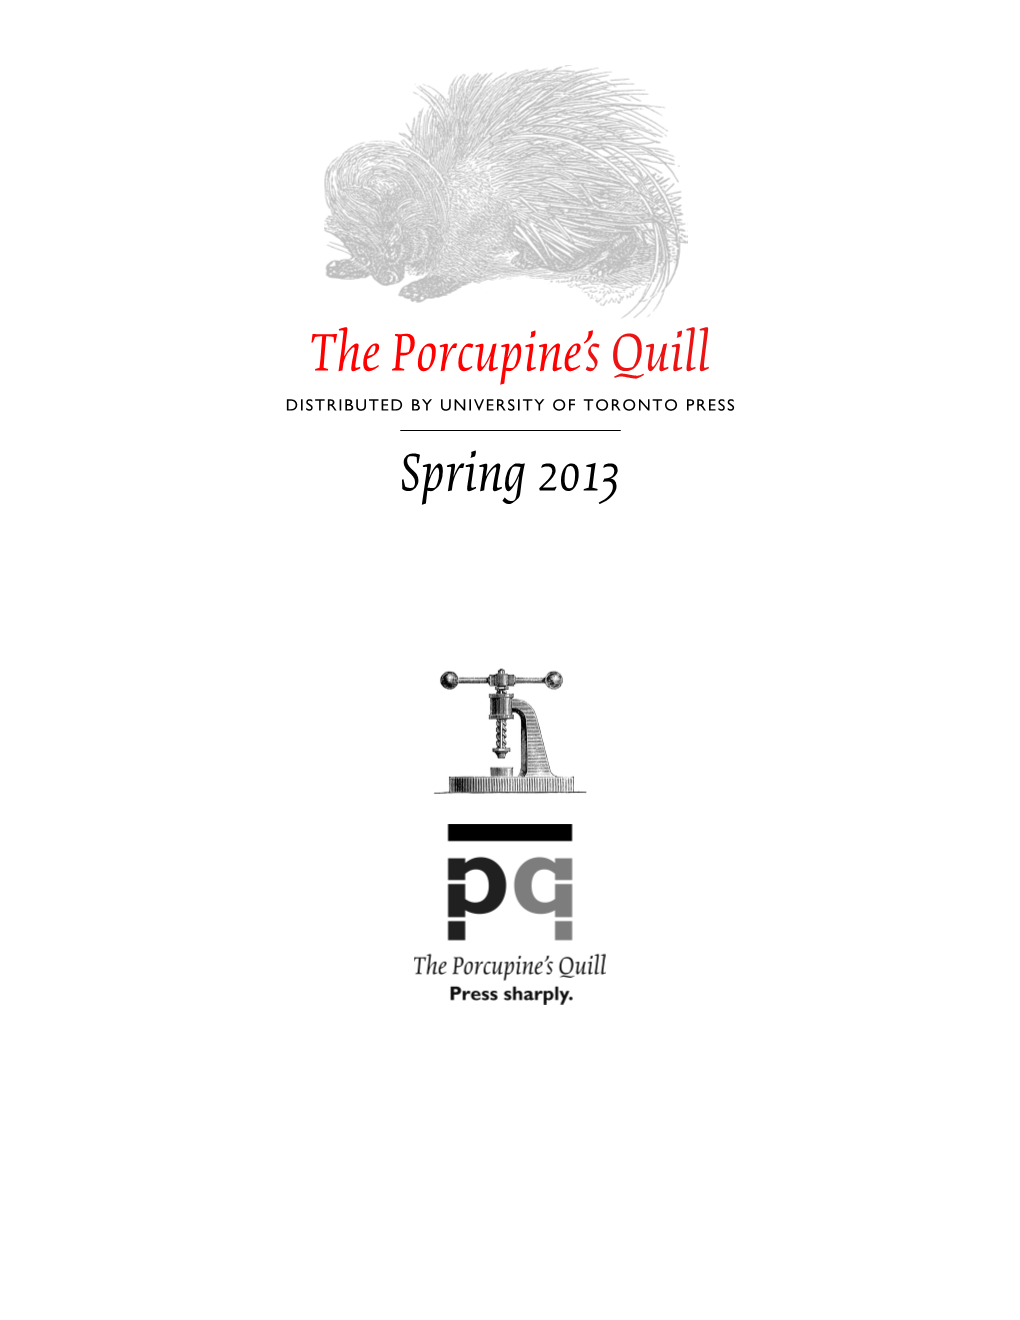 The Porcupine's Quill Spring 2013